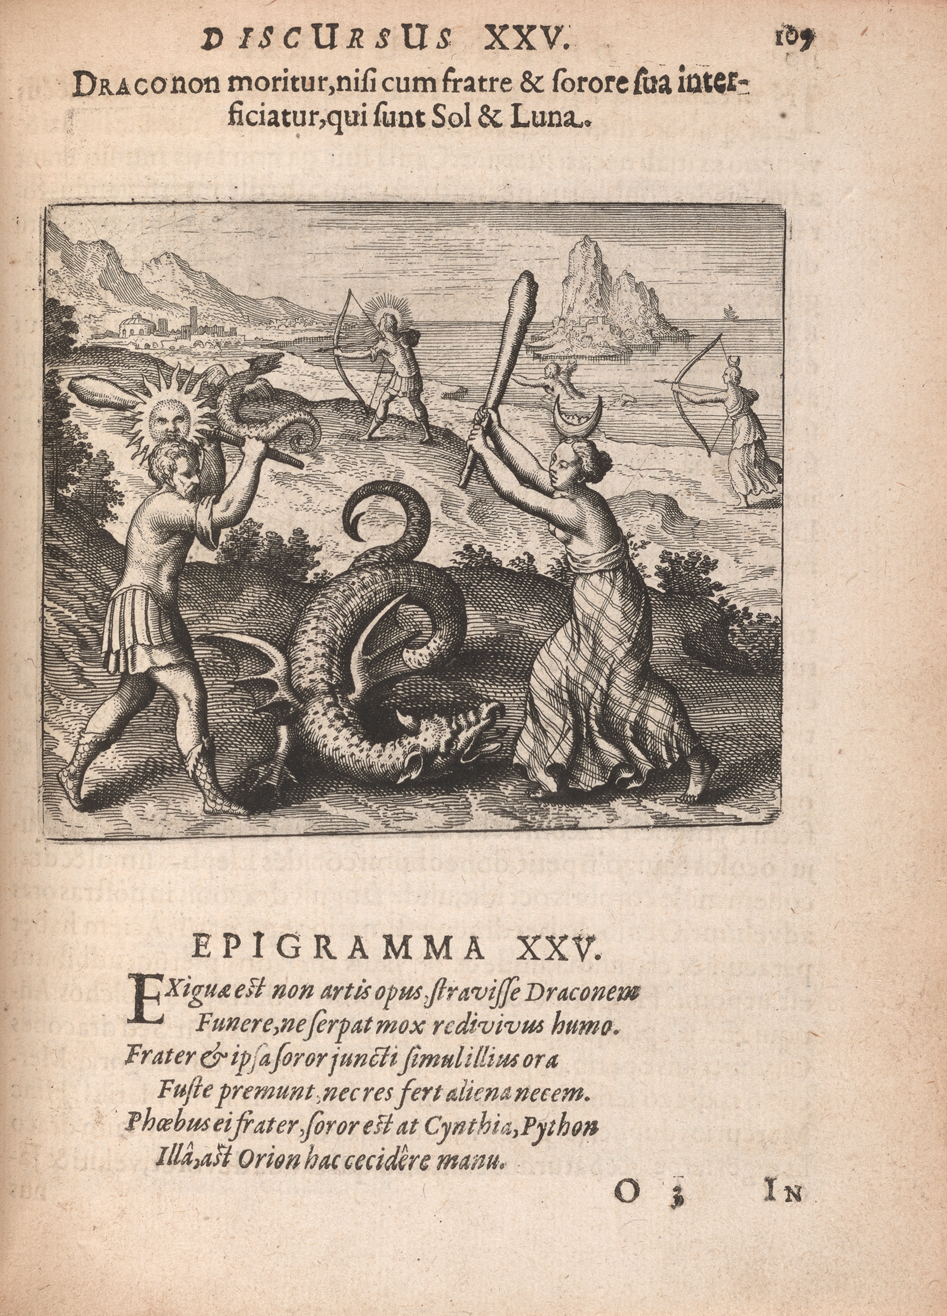 The second page of emblem 25 from Atalanta fugiens shows a motto and epigram in Latin and an image. In the foreground of the image, a man with a sun on his head, identified as Sol, and a woman with a crescent moon on her head, identified as Luna, are holding clubs and attacking a dragon with wings. Behind them Sol and Luna, are holding bows and arrows and running toward a dragon with wings.